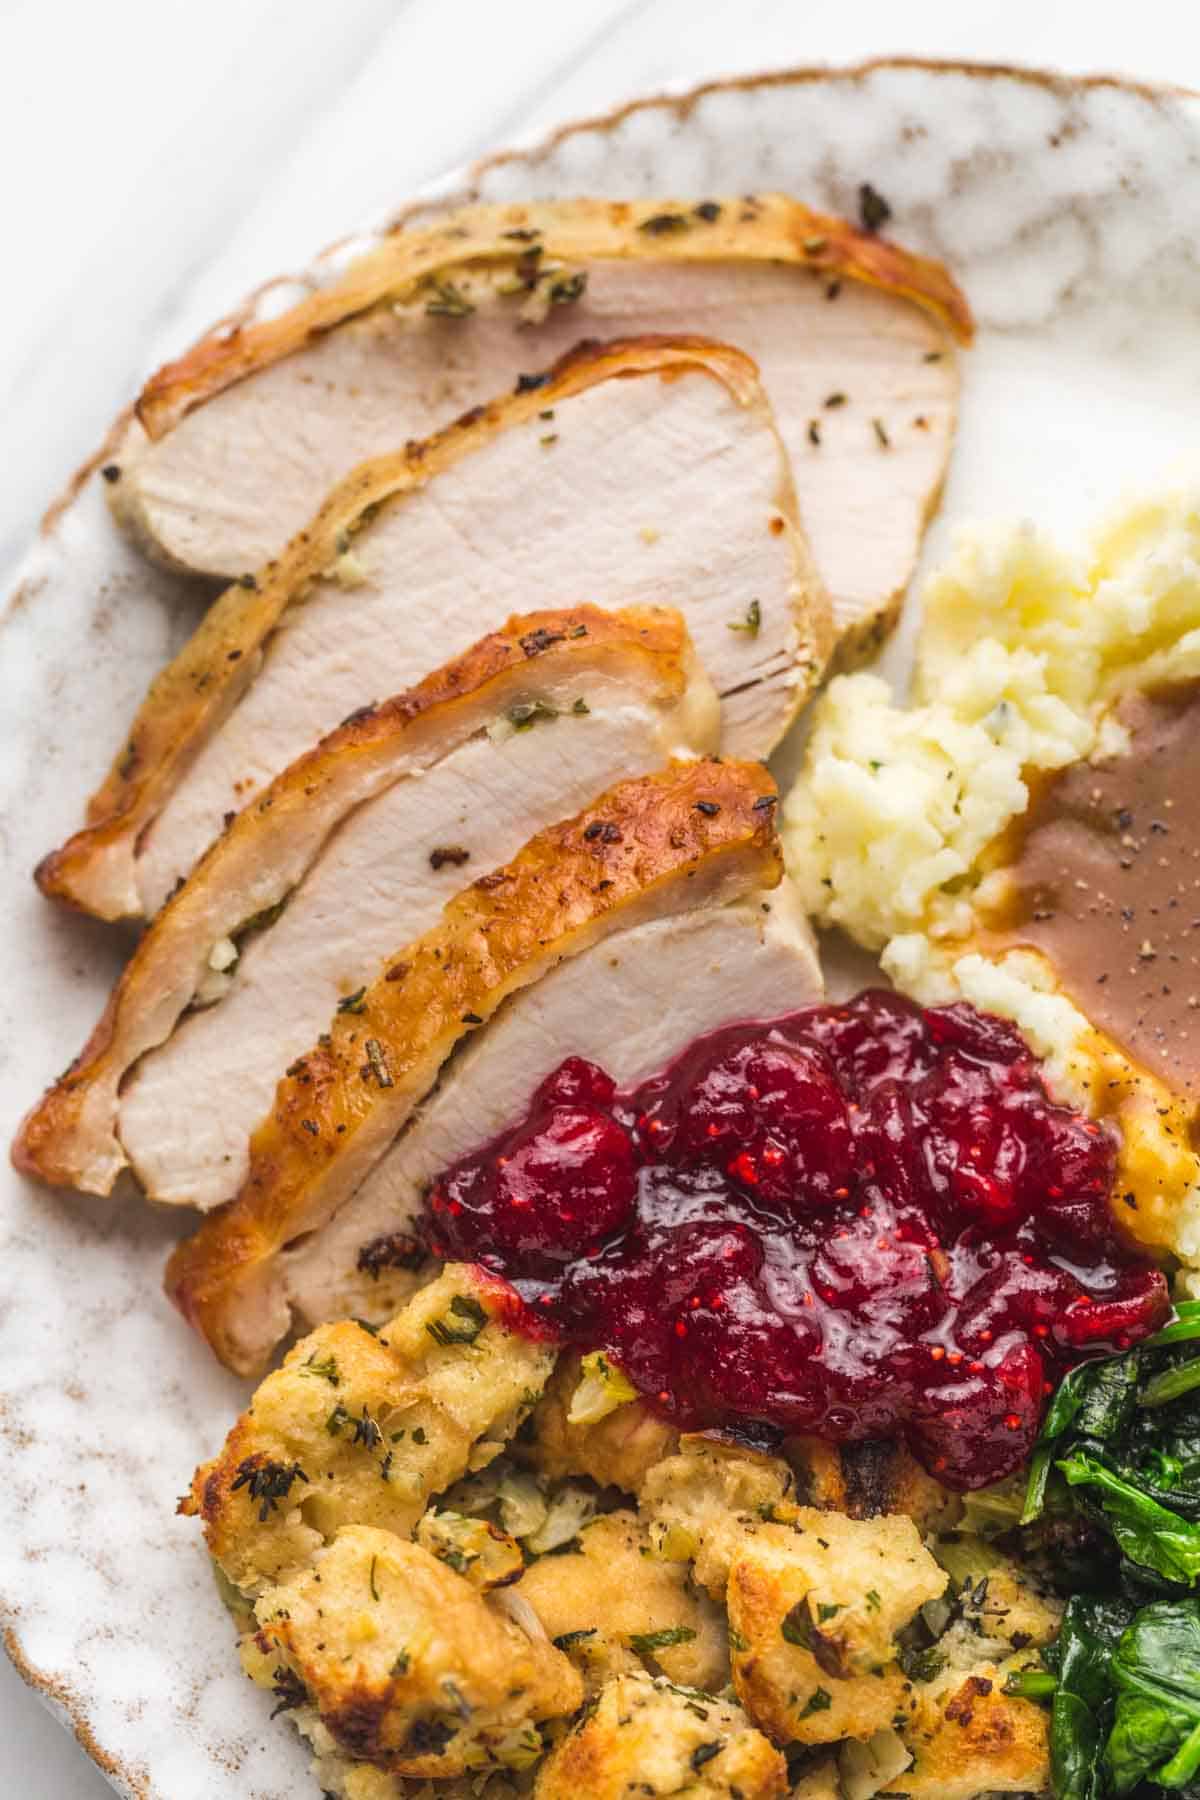 A plate with turkey slices, mashed potatoes, cranberry sauce, stuffing, and sauteed spinach